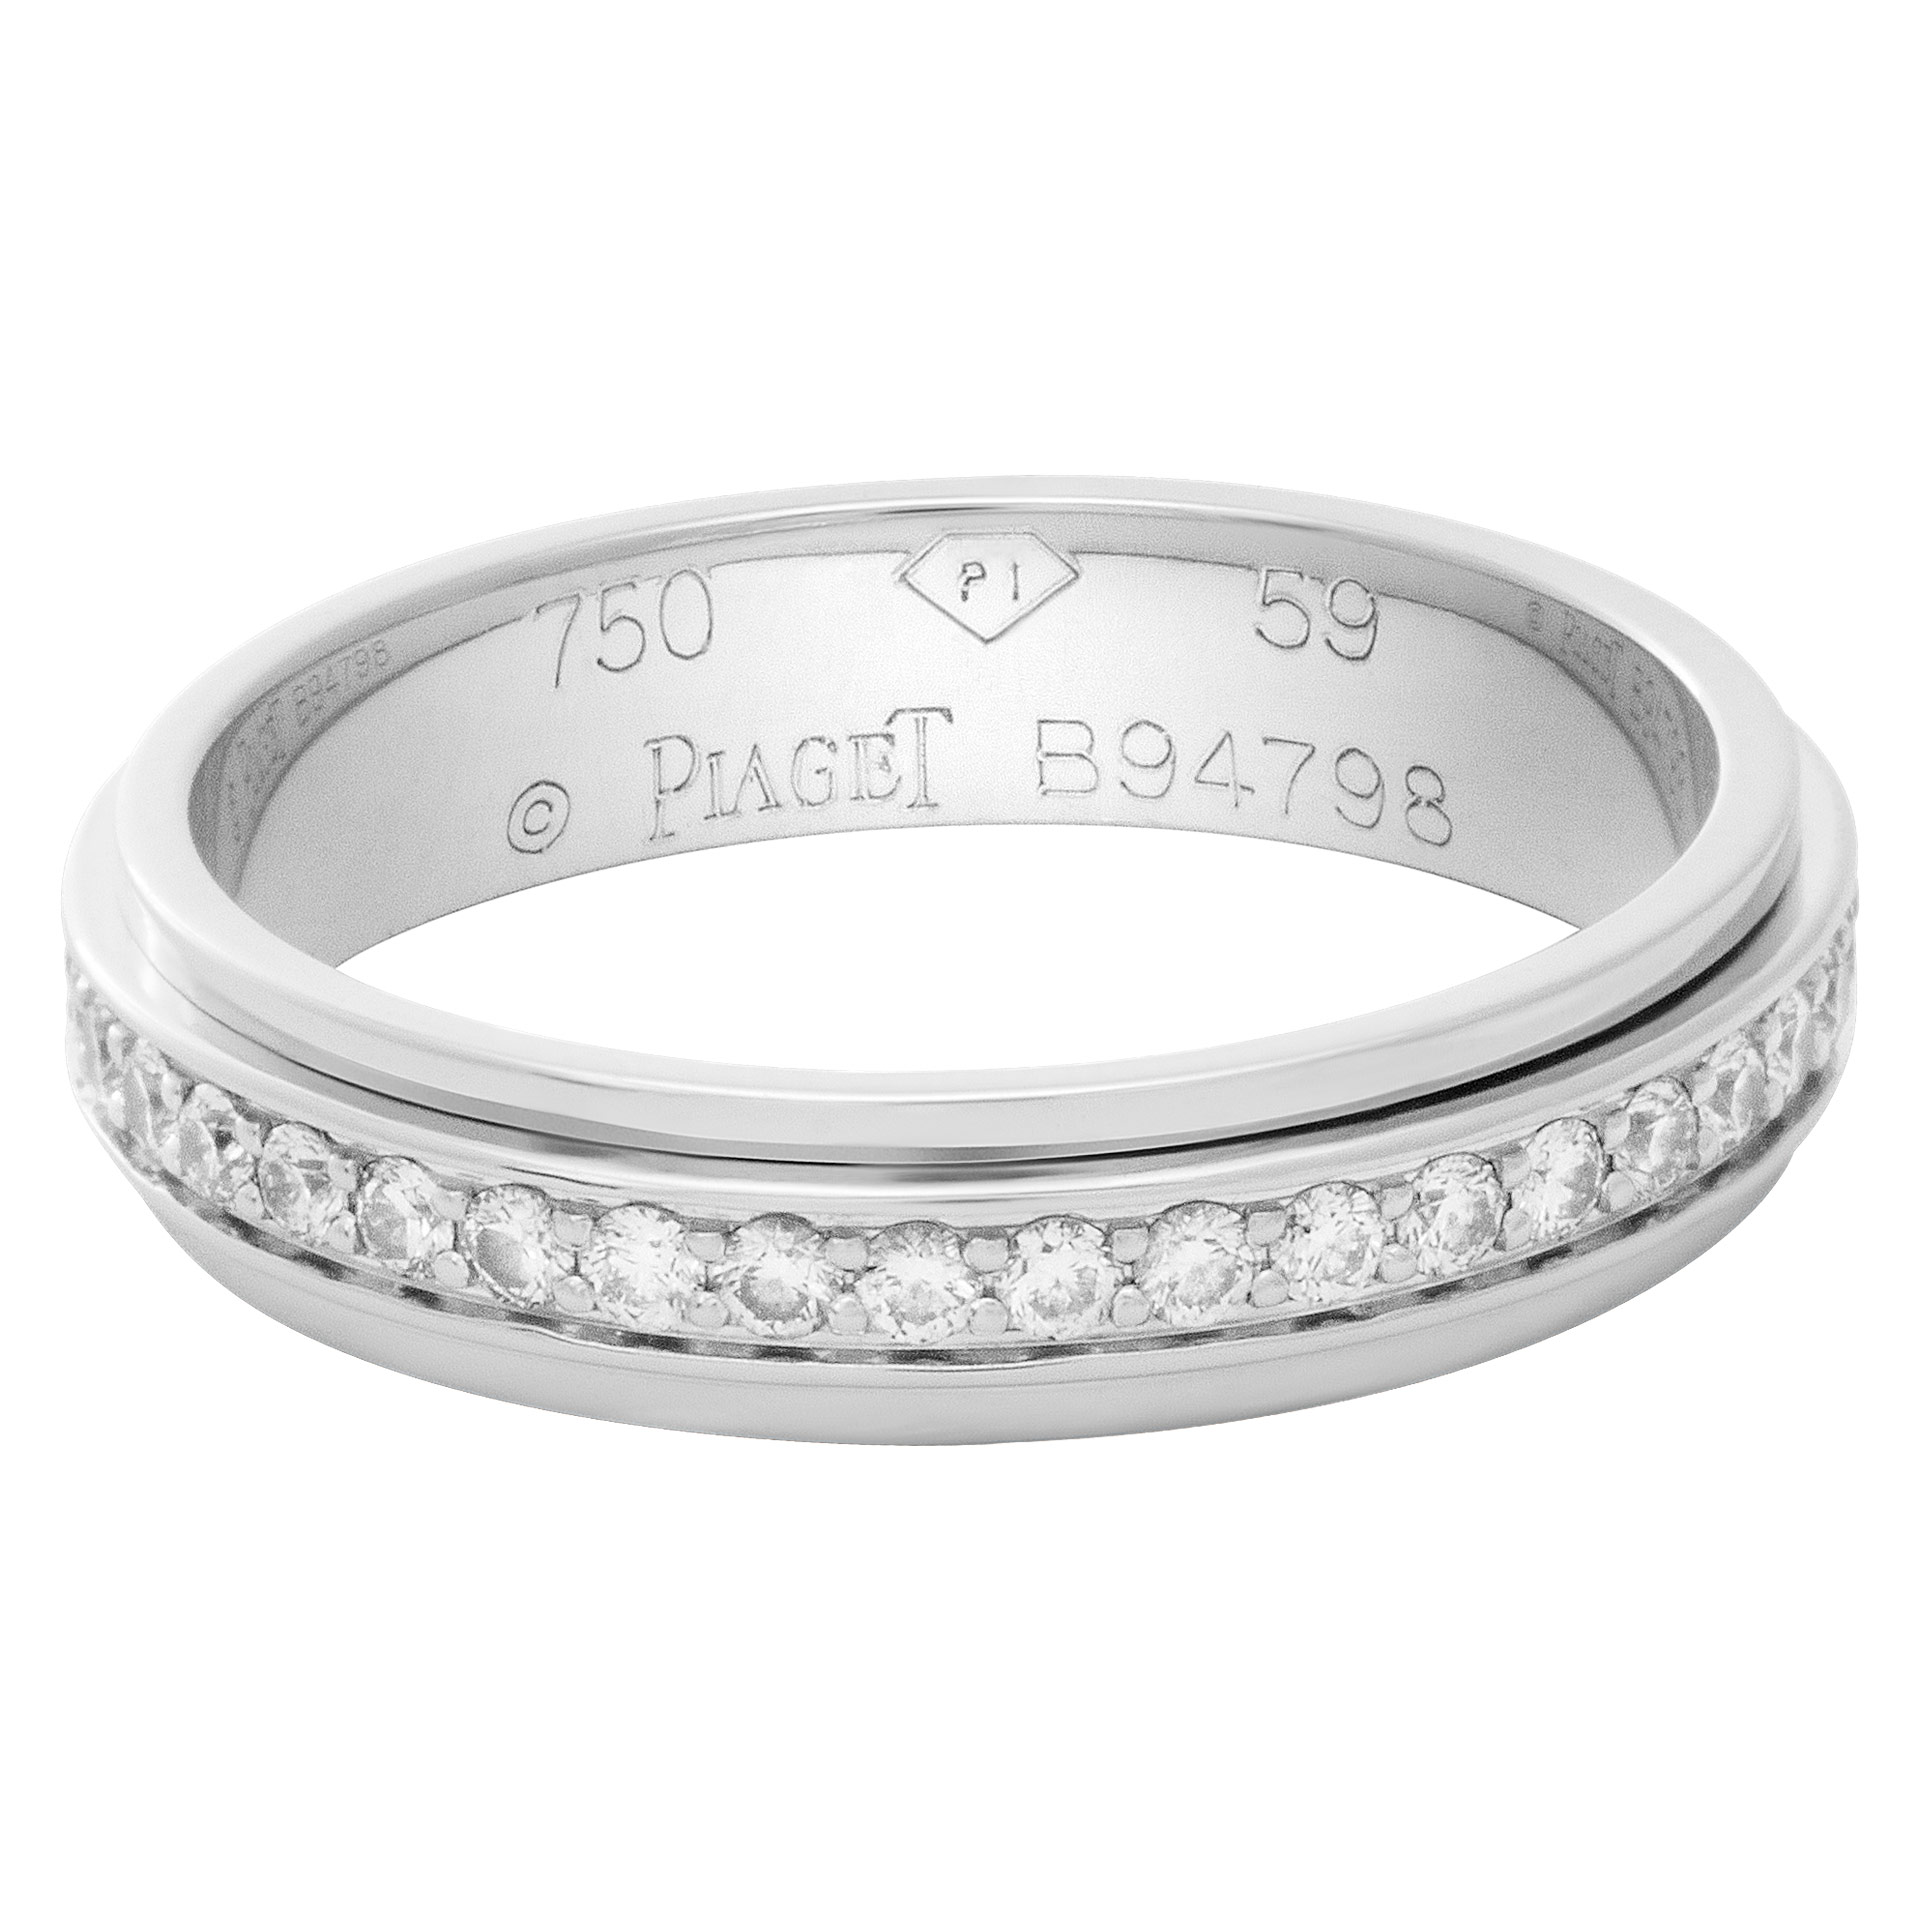 Piaget Diamond eternity Band and Ring 18k white gold. 1.00 cts in diamond. Size 8.75